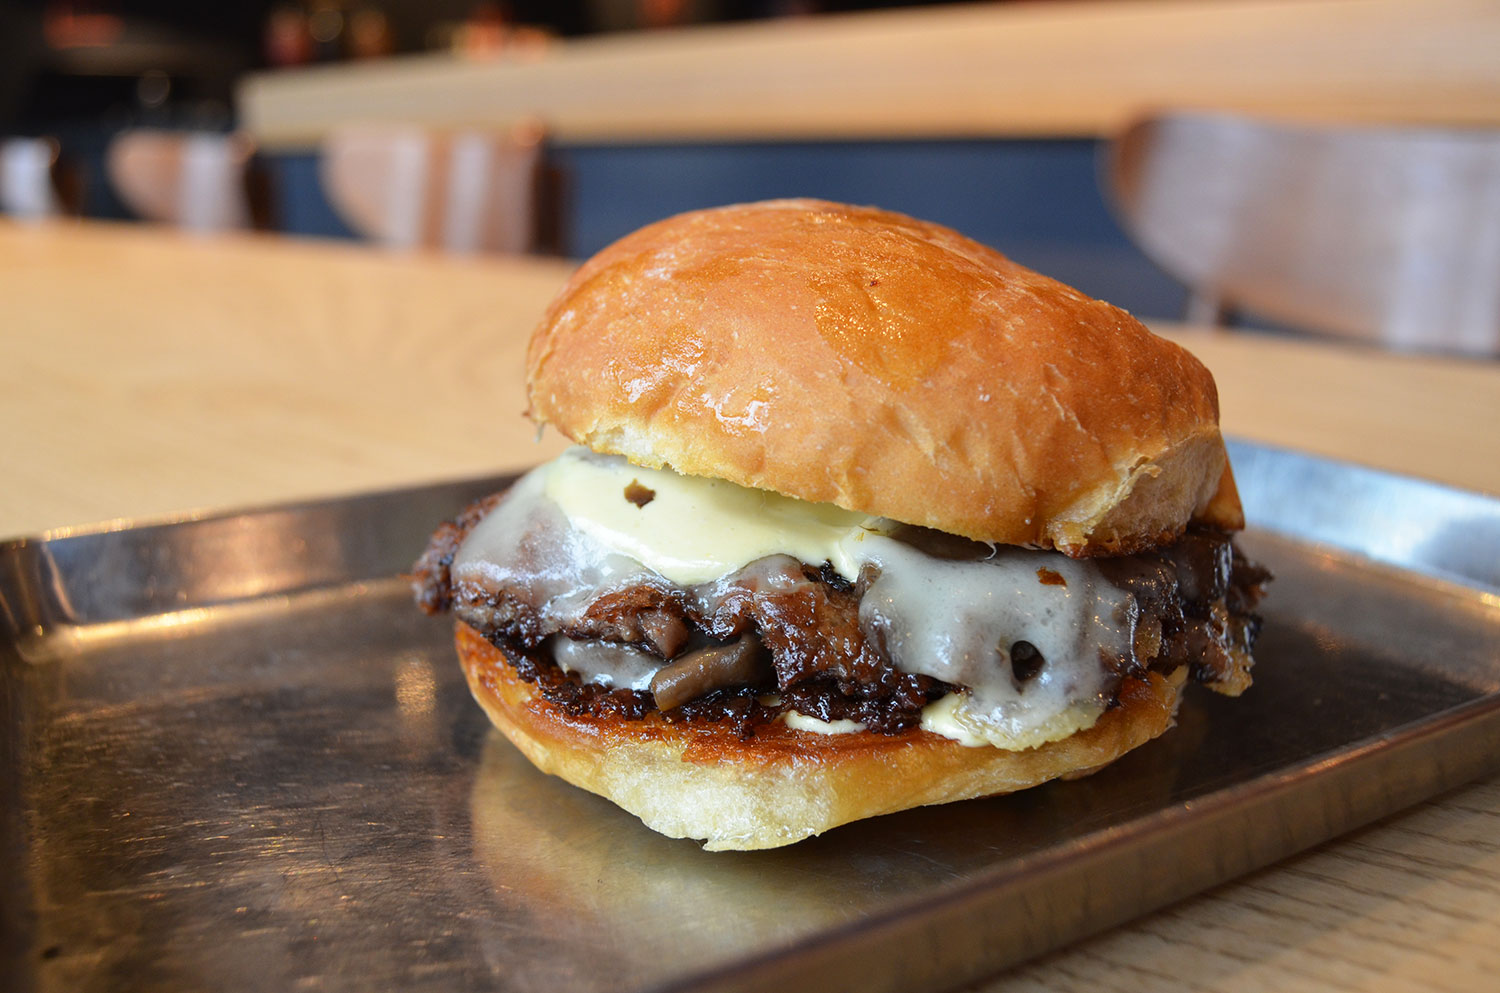 Sauce Magazine - First Look: Burger Champ in Maplewood